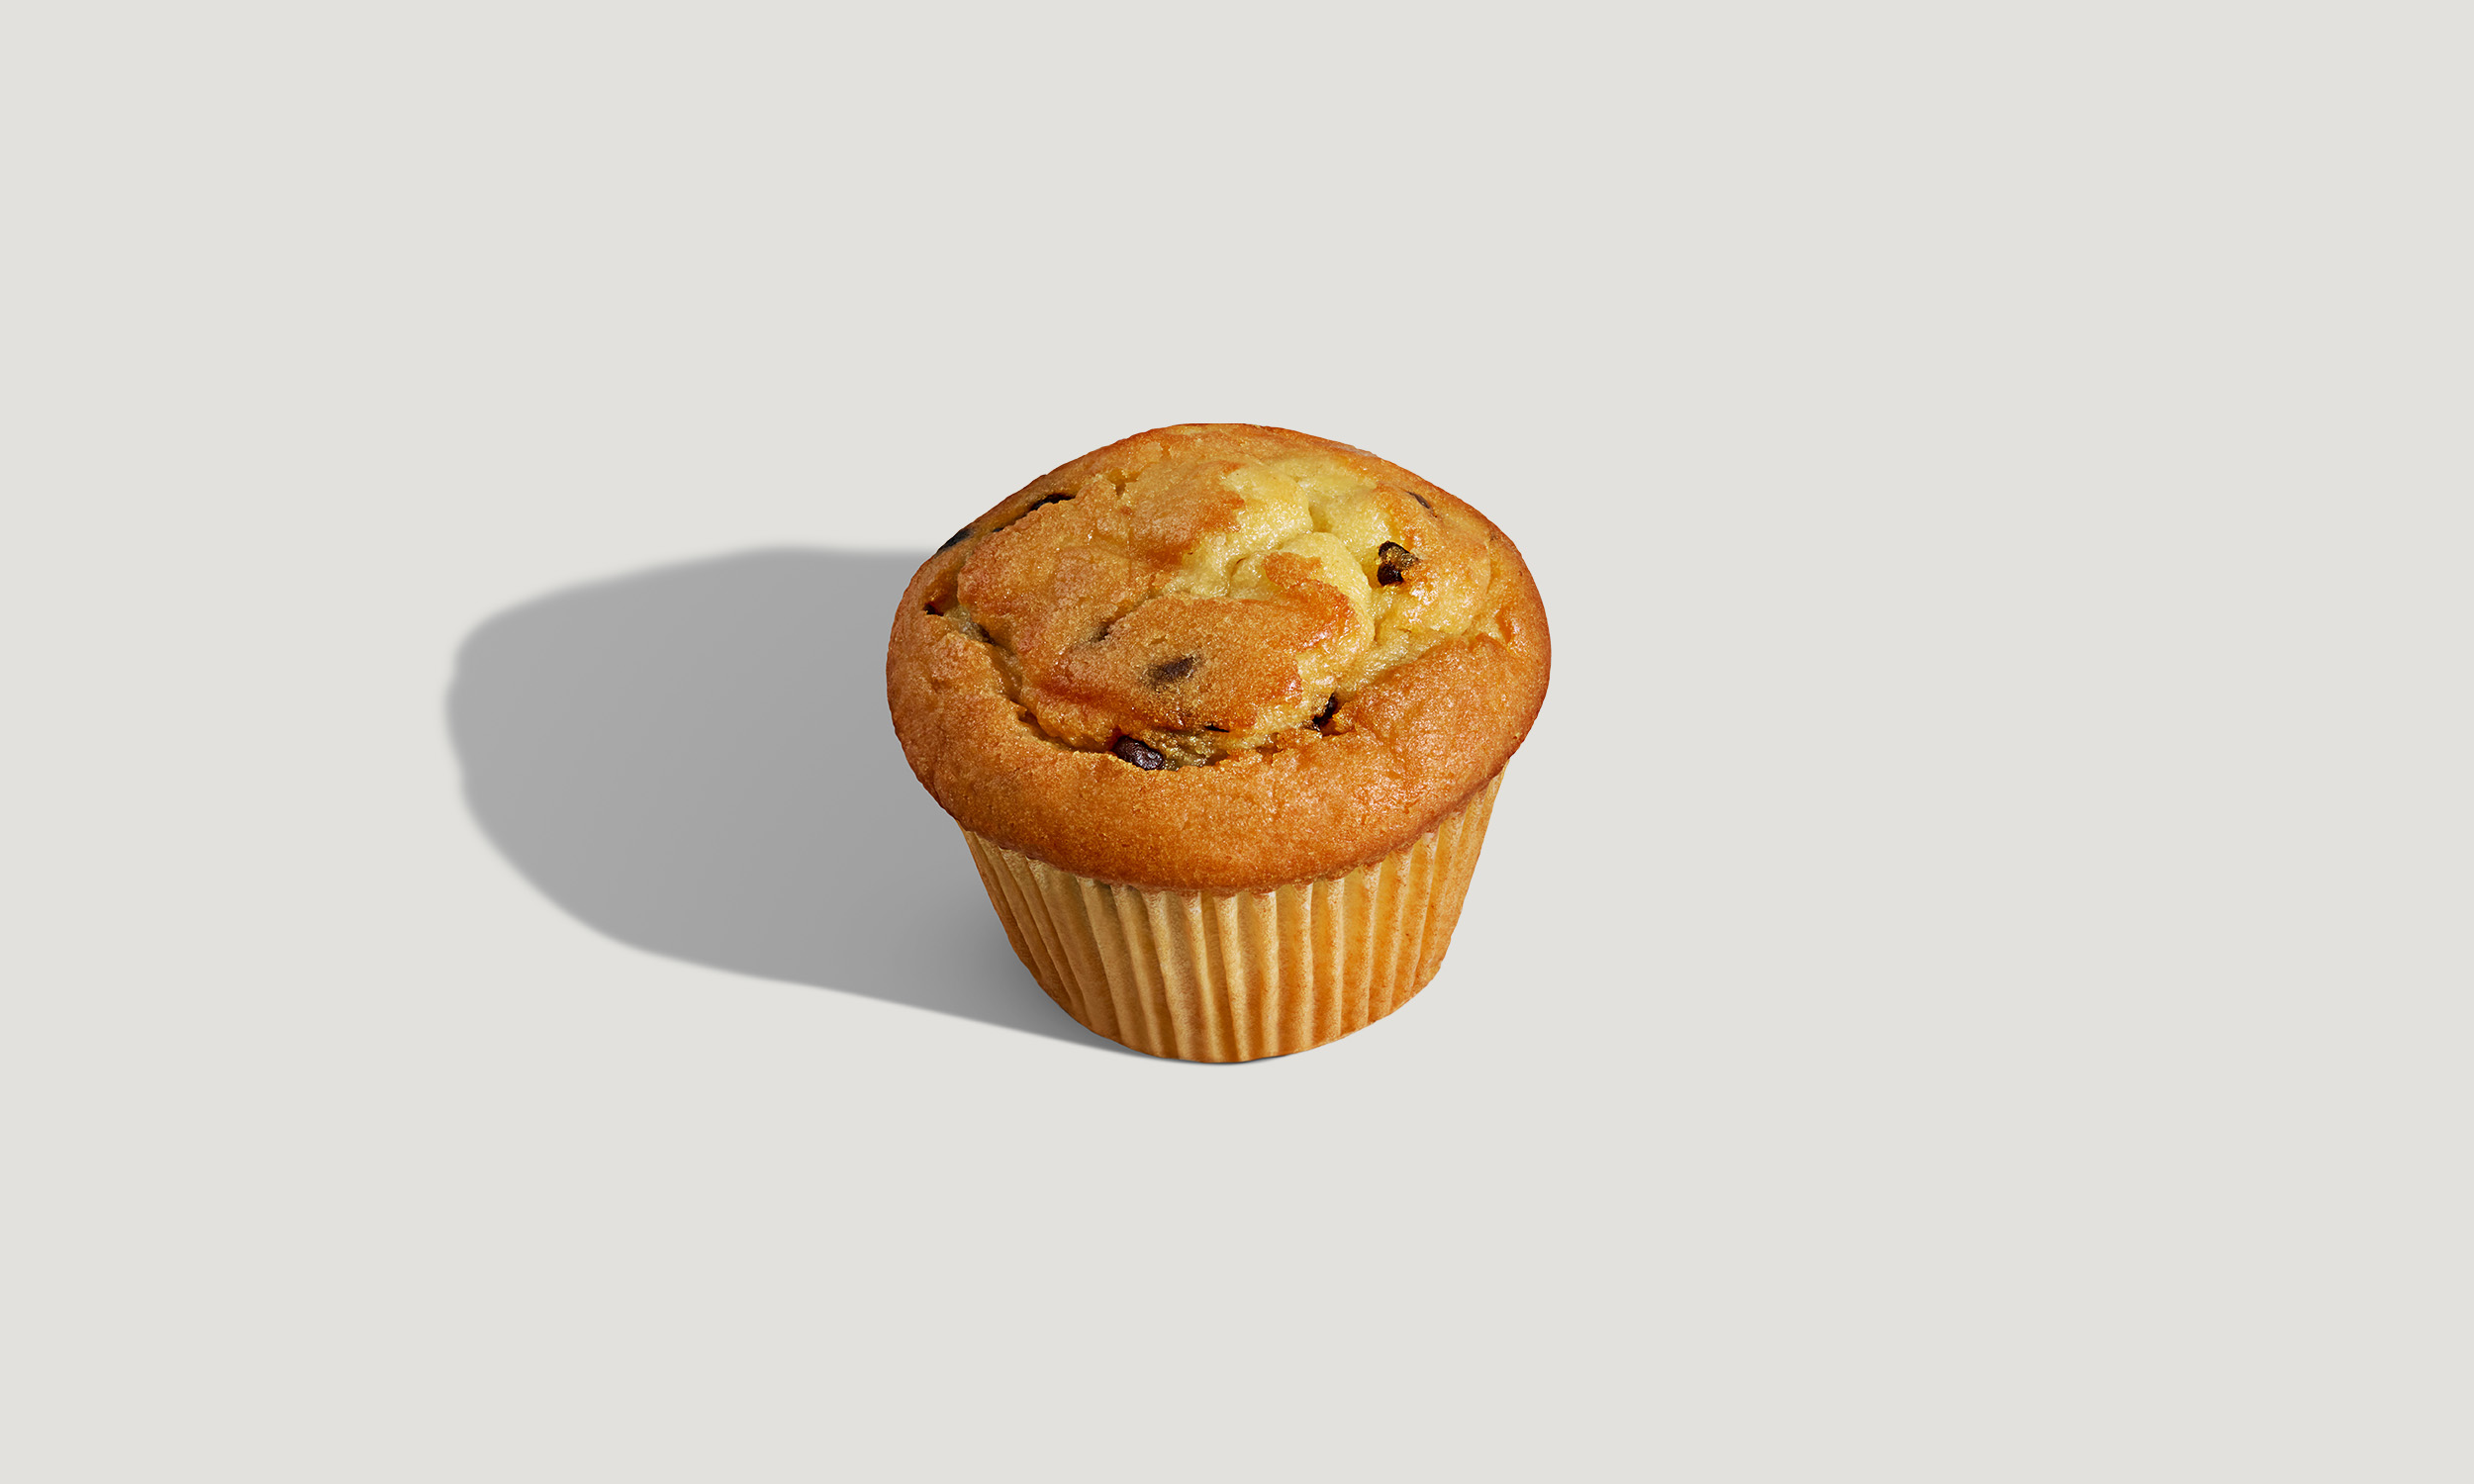 Speedway_IsometricProductPhotography_Muffin.jpg